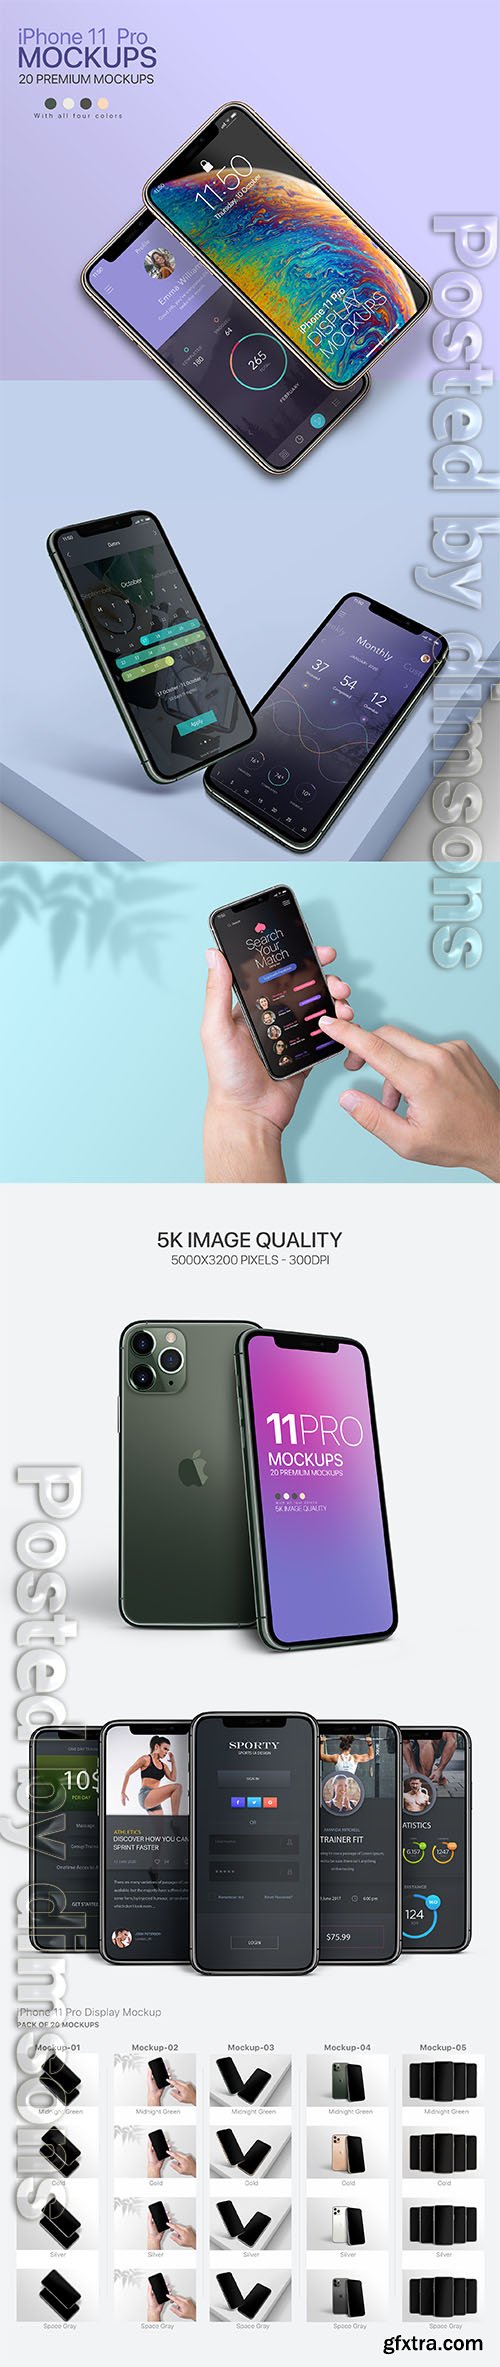 20 Mockups of iPhone 11 Pro